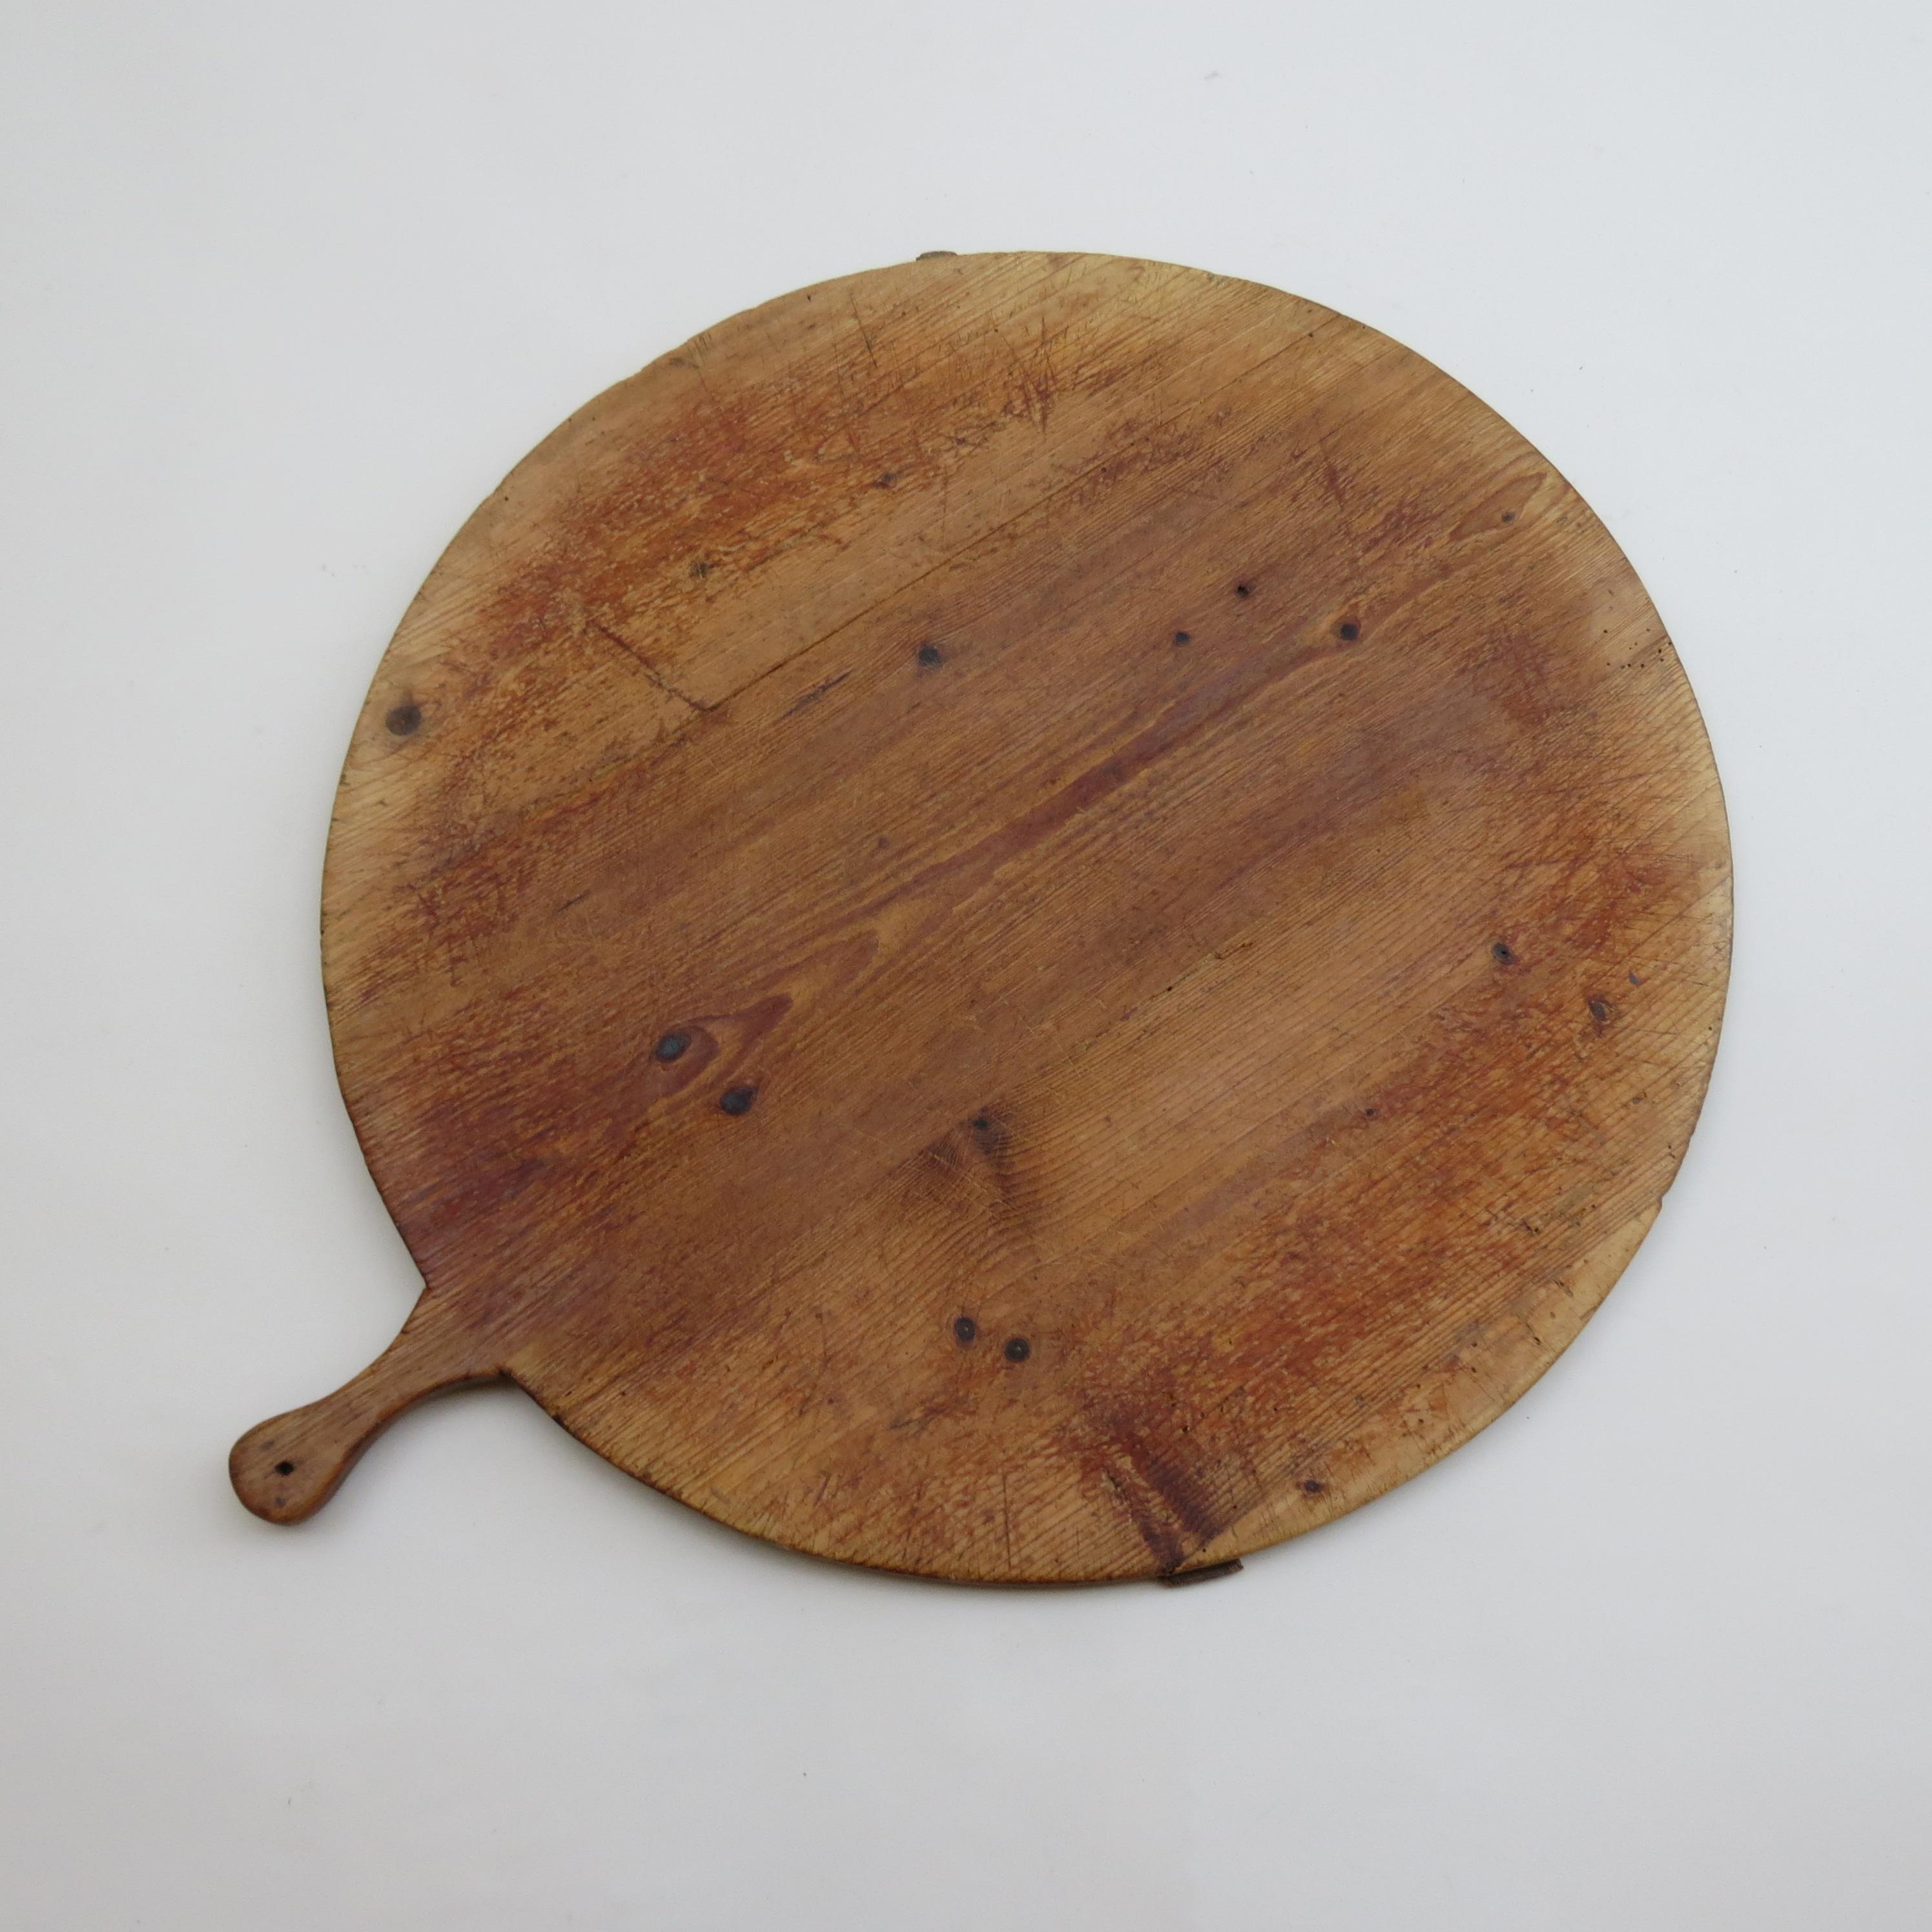 20th Century Very Large Vintage Wooden Bread Boards Cutting Boards Pizza Boards 2 Available